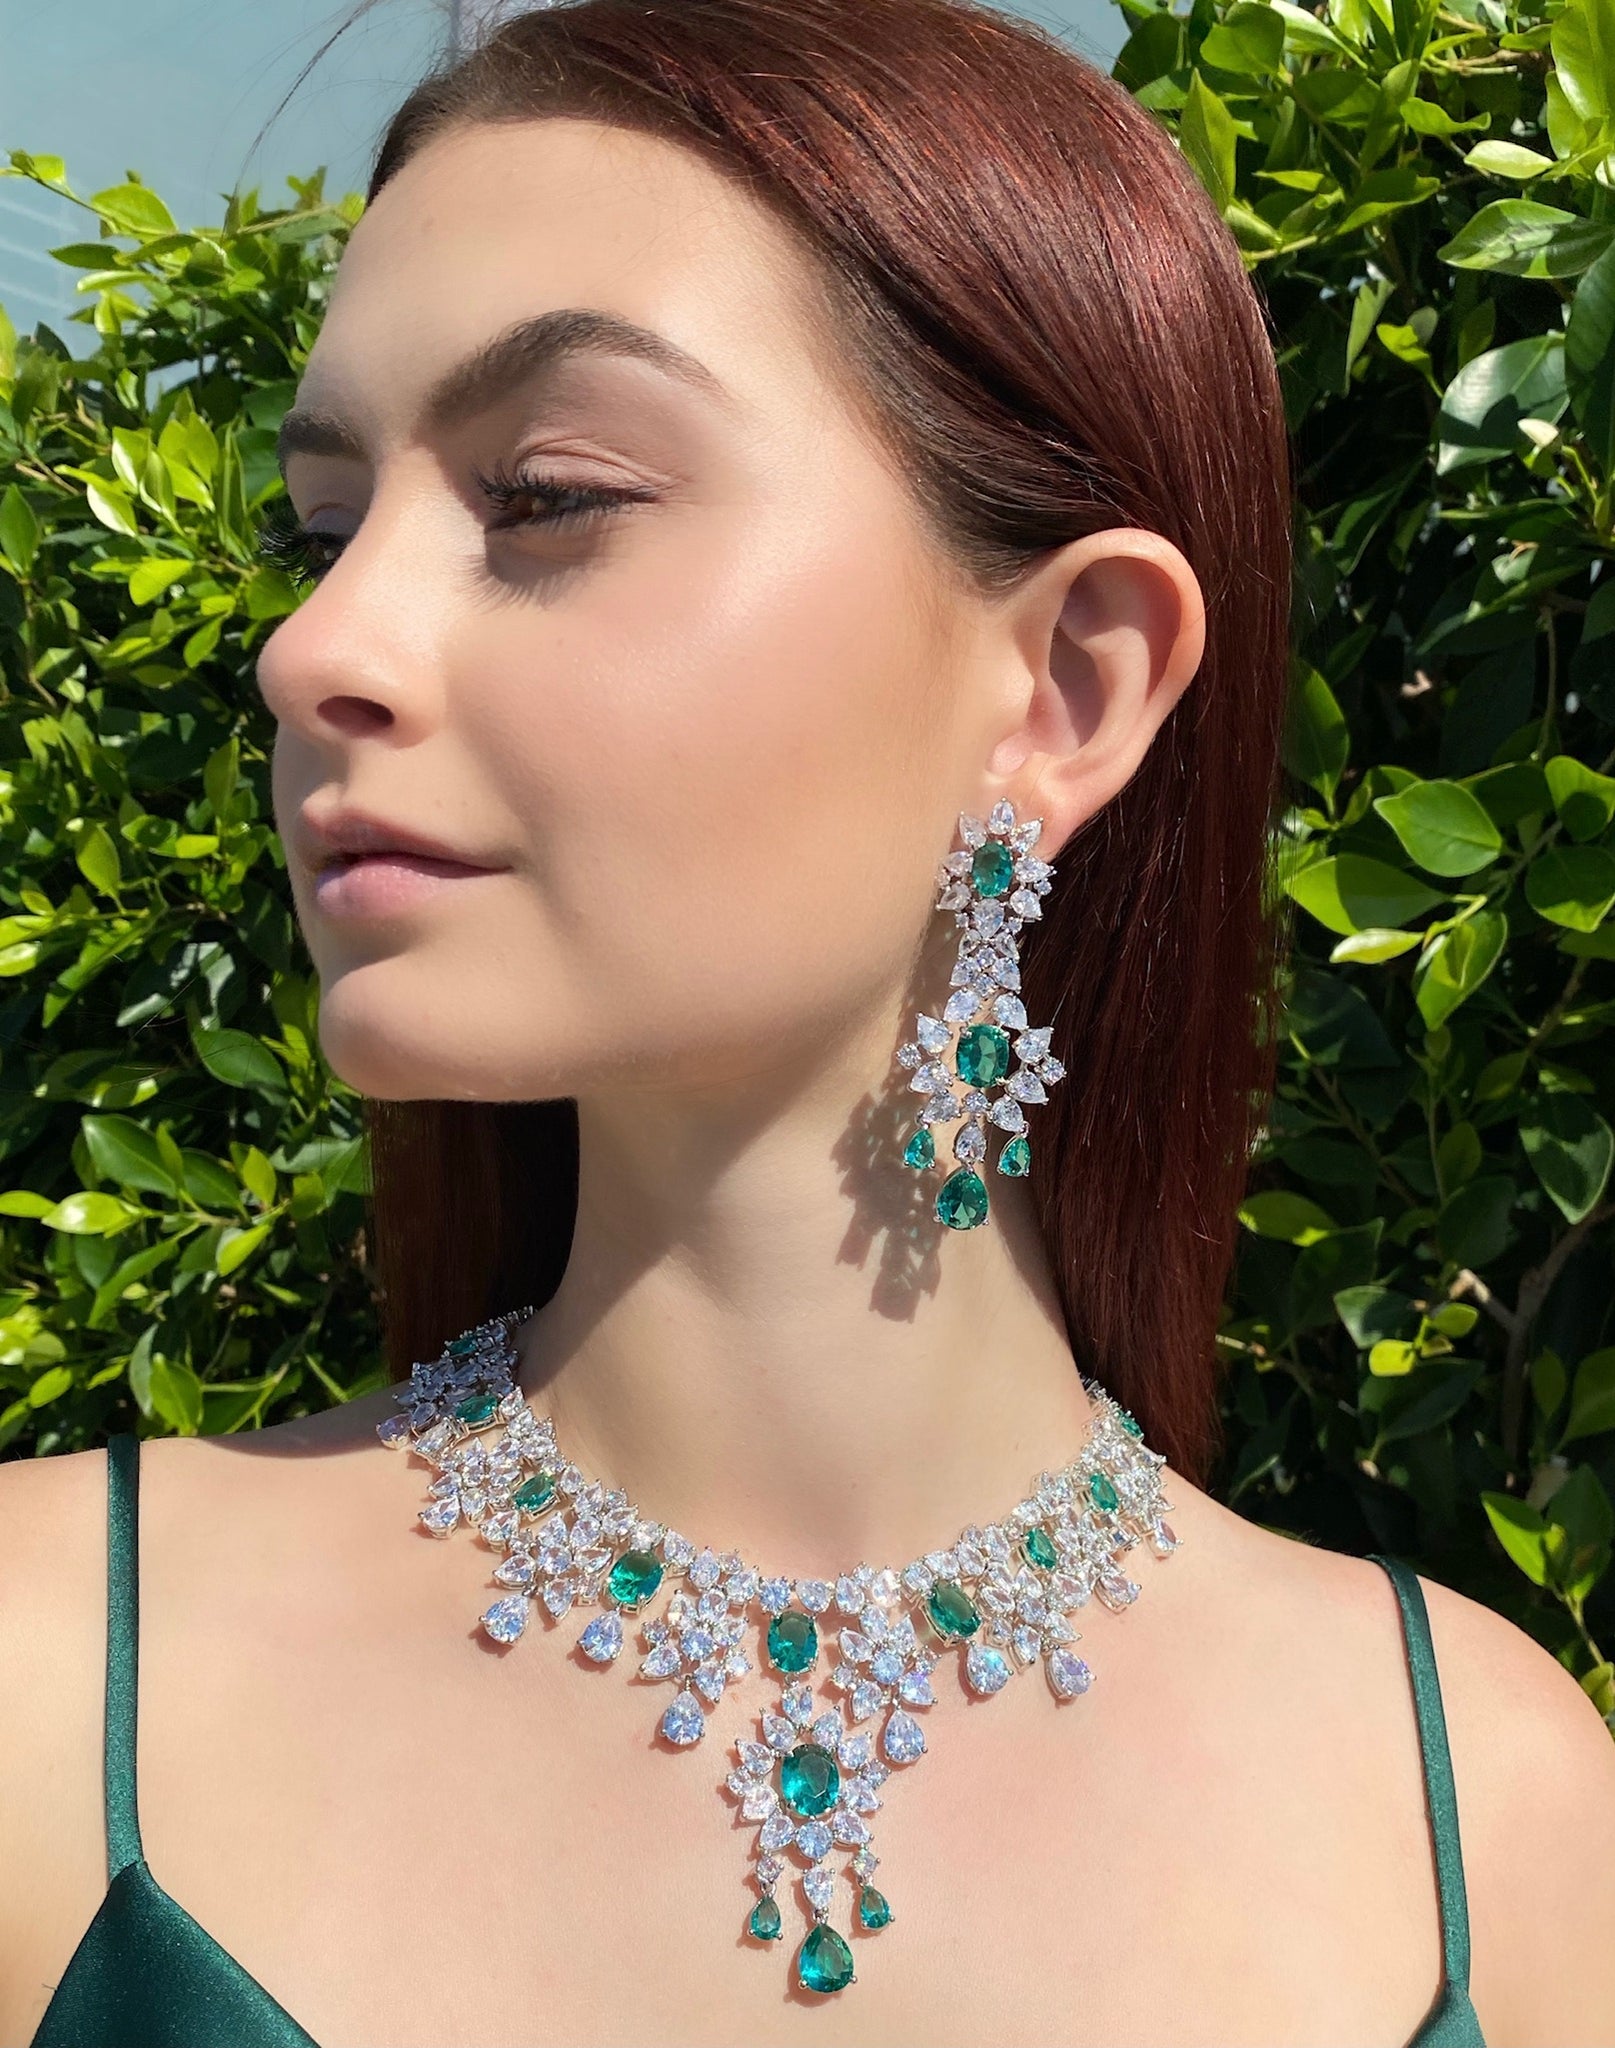 Green Tourmaline Diamondesque Necklace & Earrings full view on model